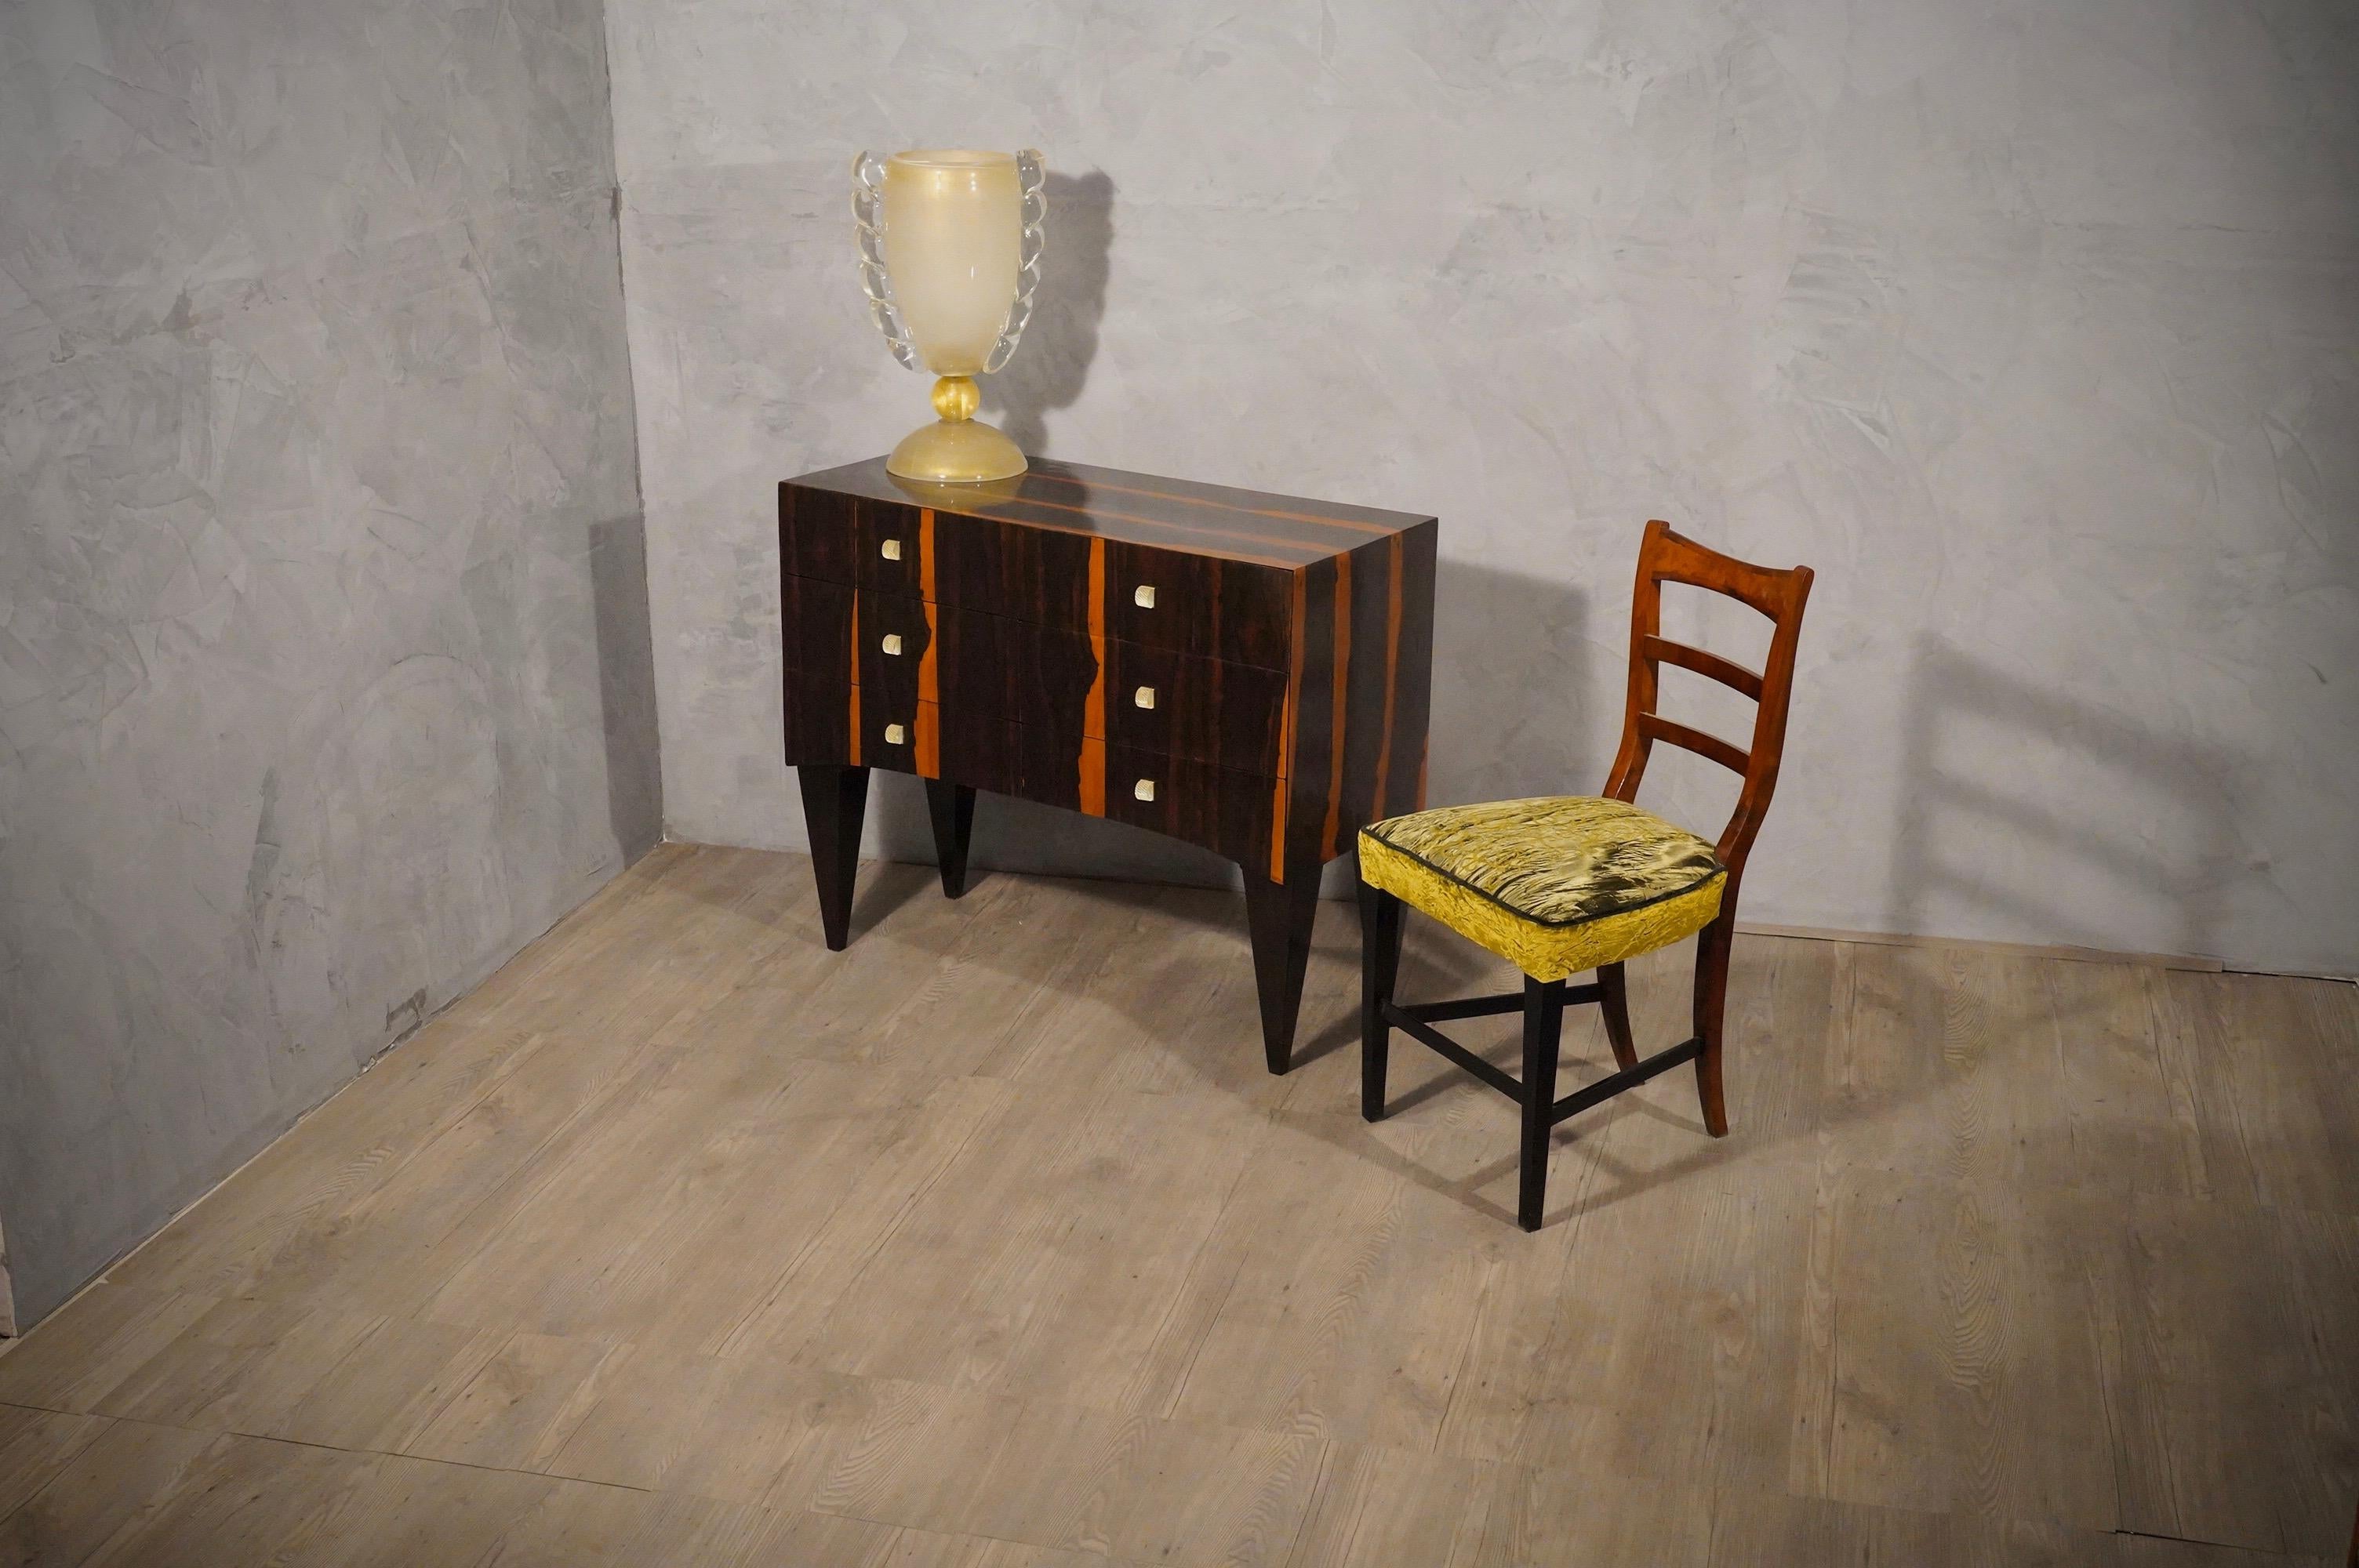 Glamor and precious dresser, due to the choice of refined materials, and a pleasant patina emphasizes the grain of the Macassar wood and makes the dresser elegant and unique.

The chest of drawers is veneered in Macassar wood; there are five